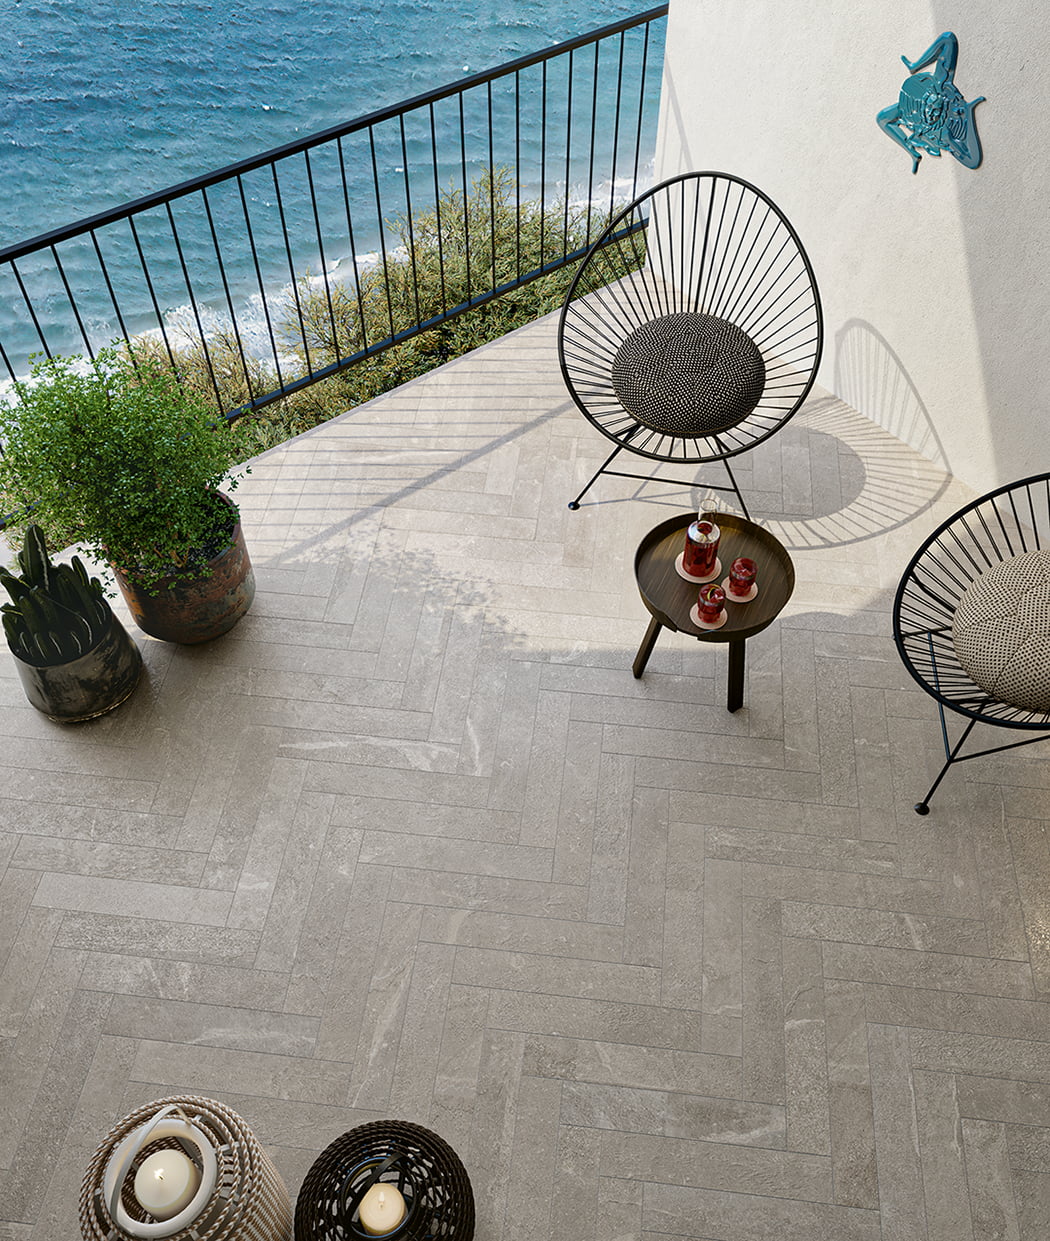 Ibla 4x20 Chevron Porcelain Tile in Resina featured on a balcony